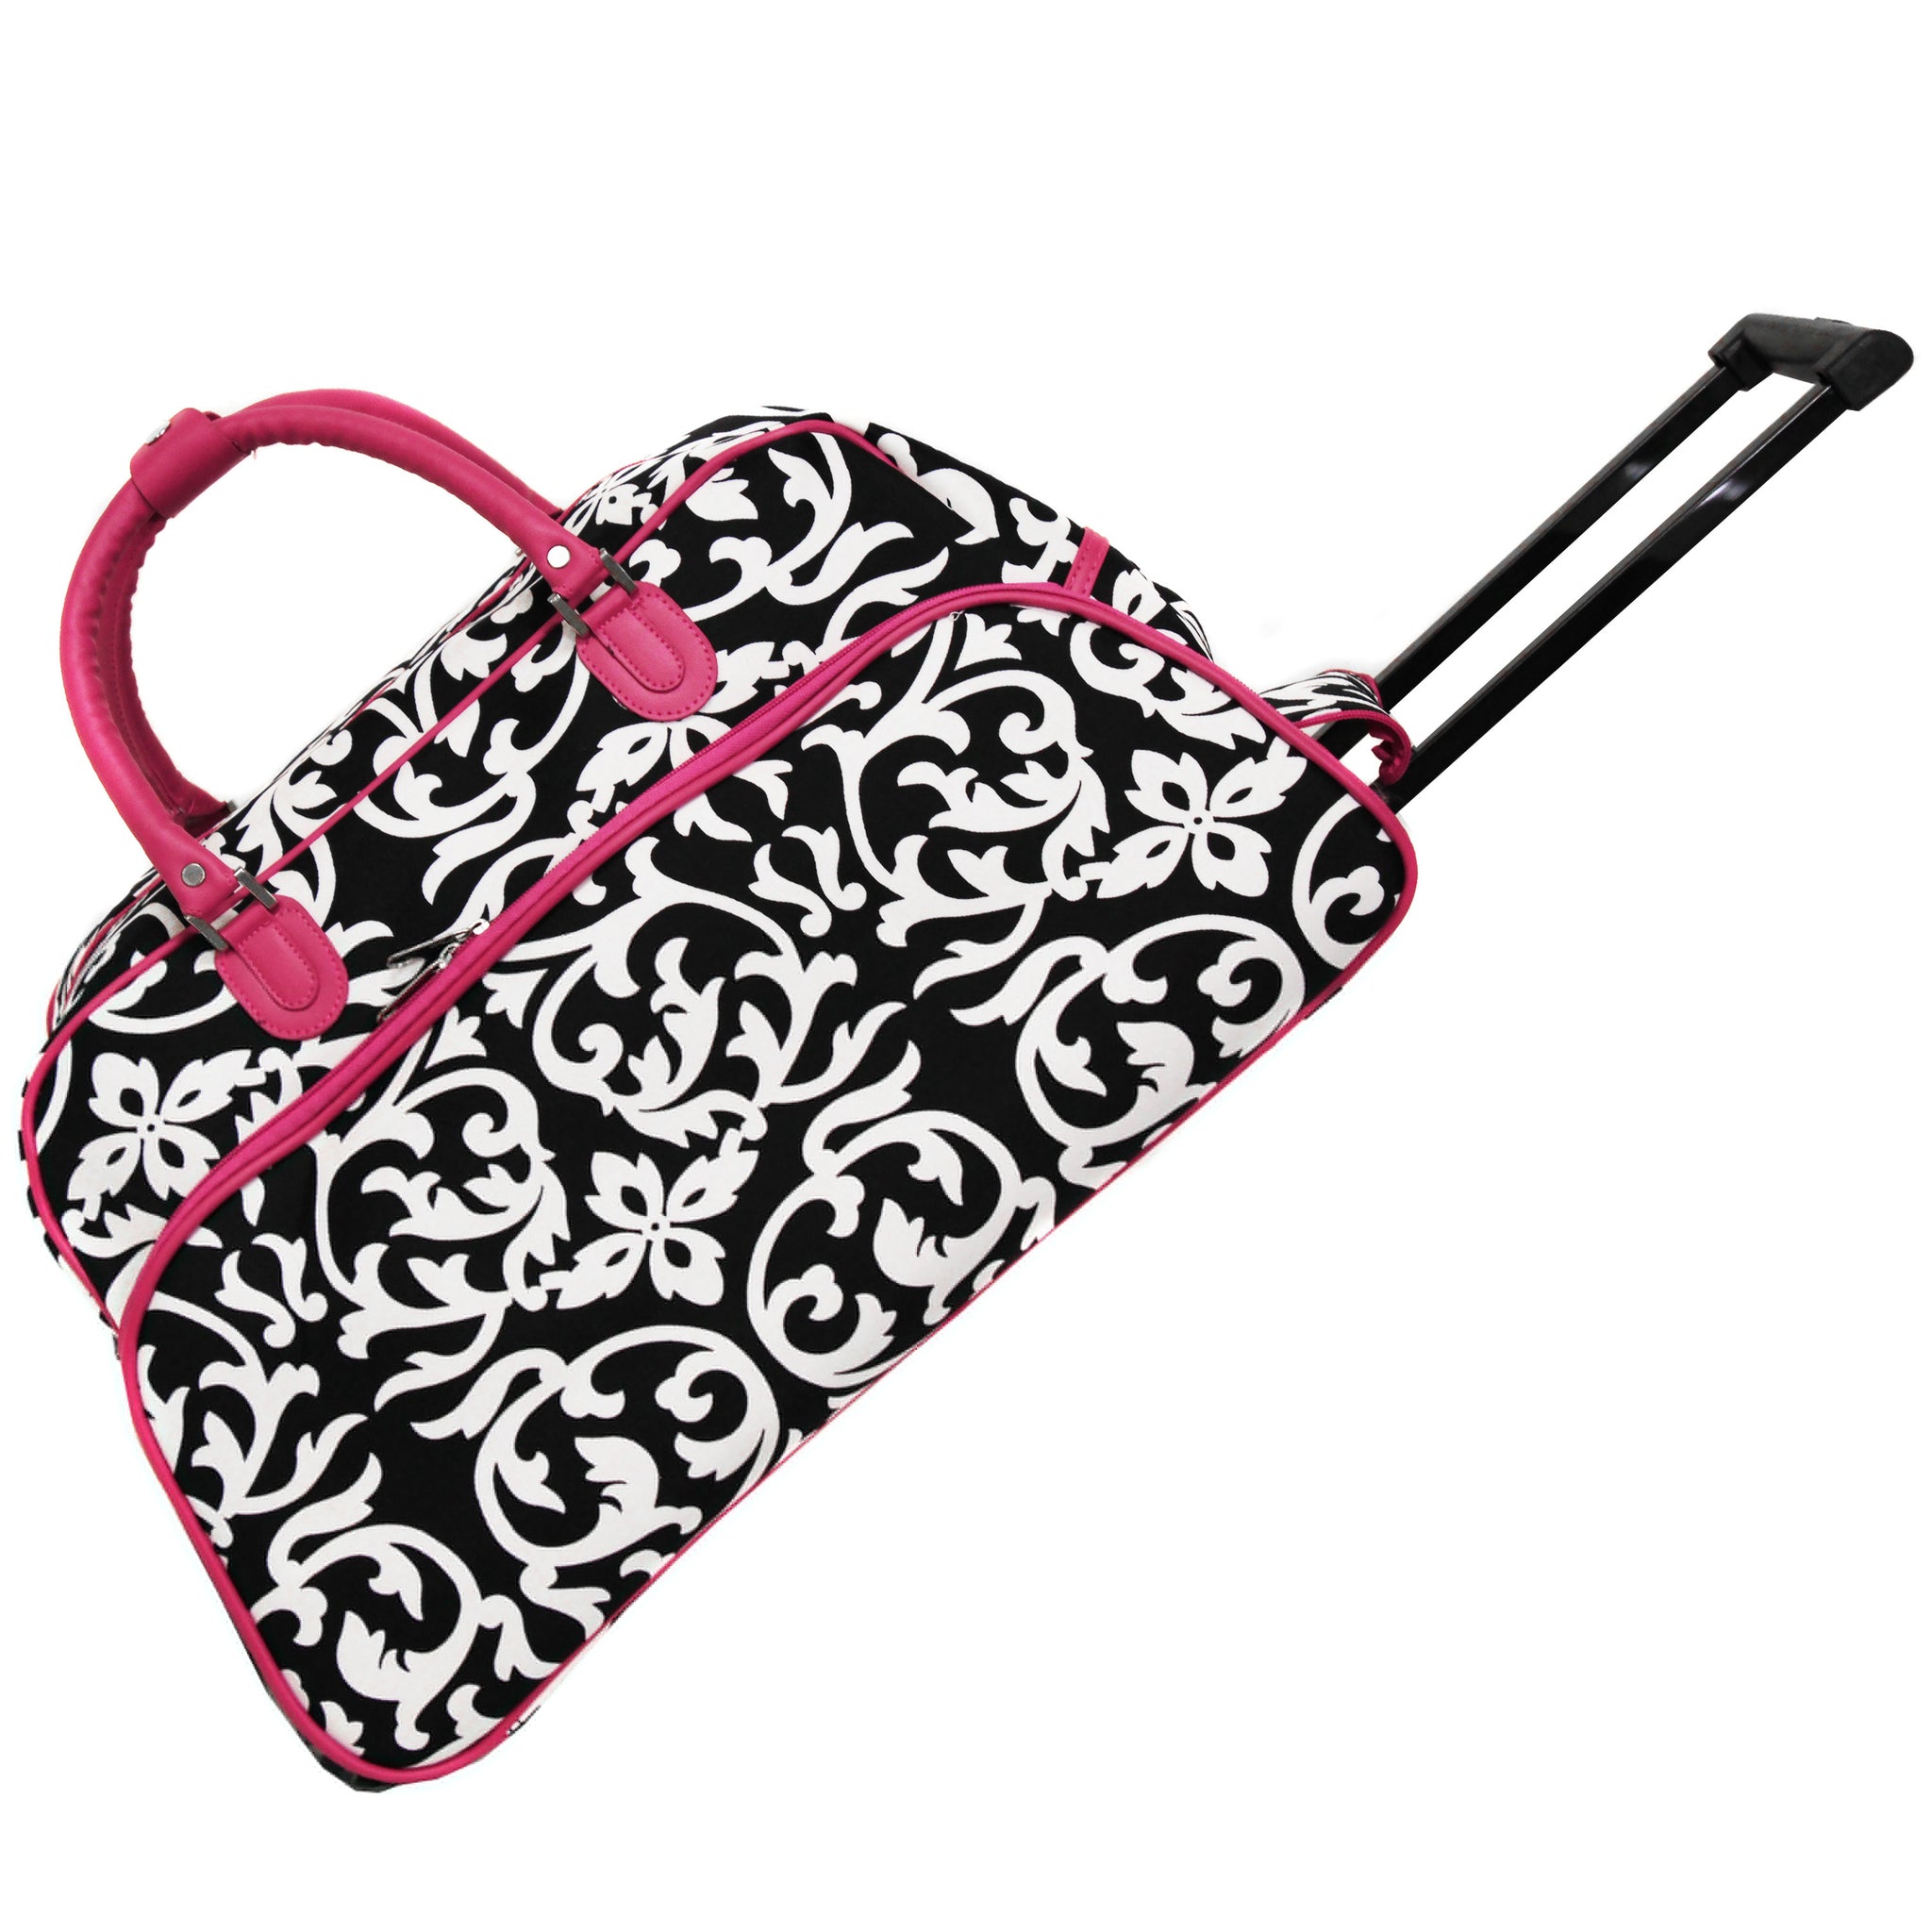 CalBags Damask 21" Rolling Carry-On Duffel Bags